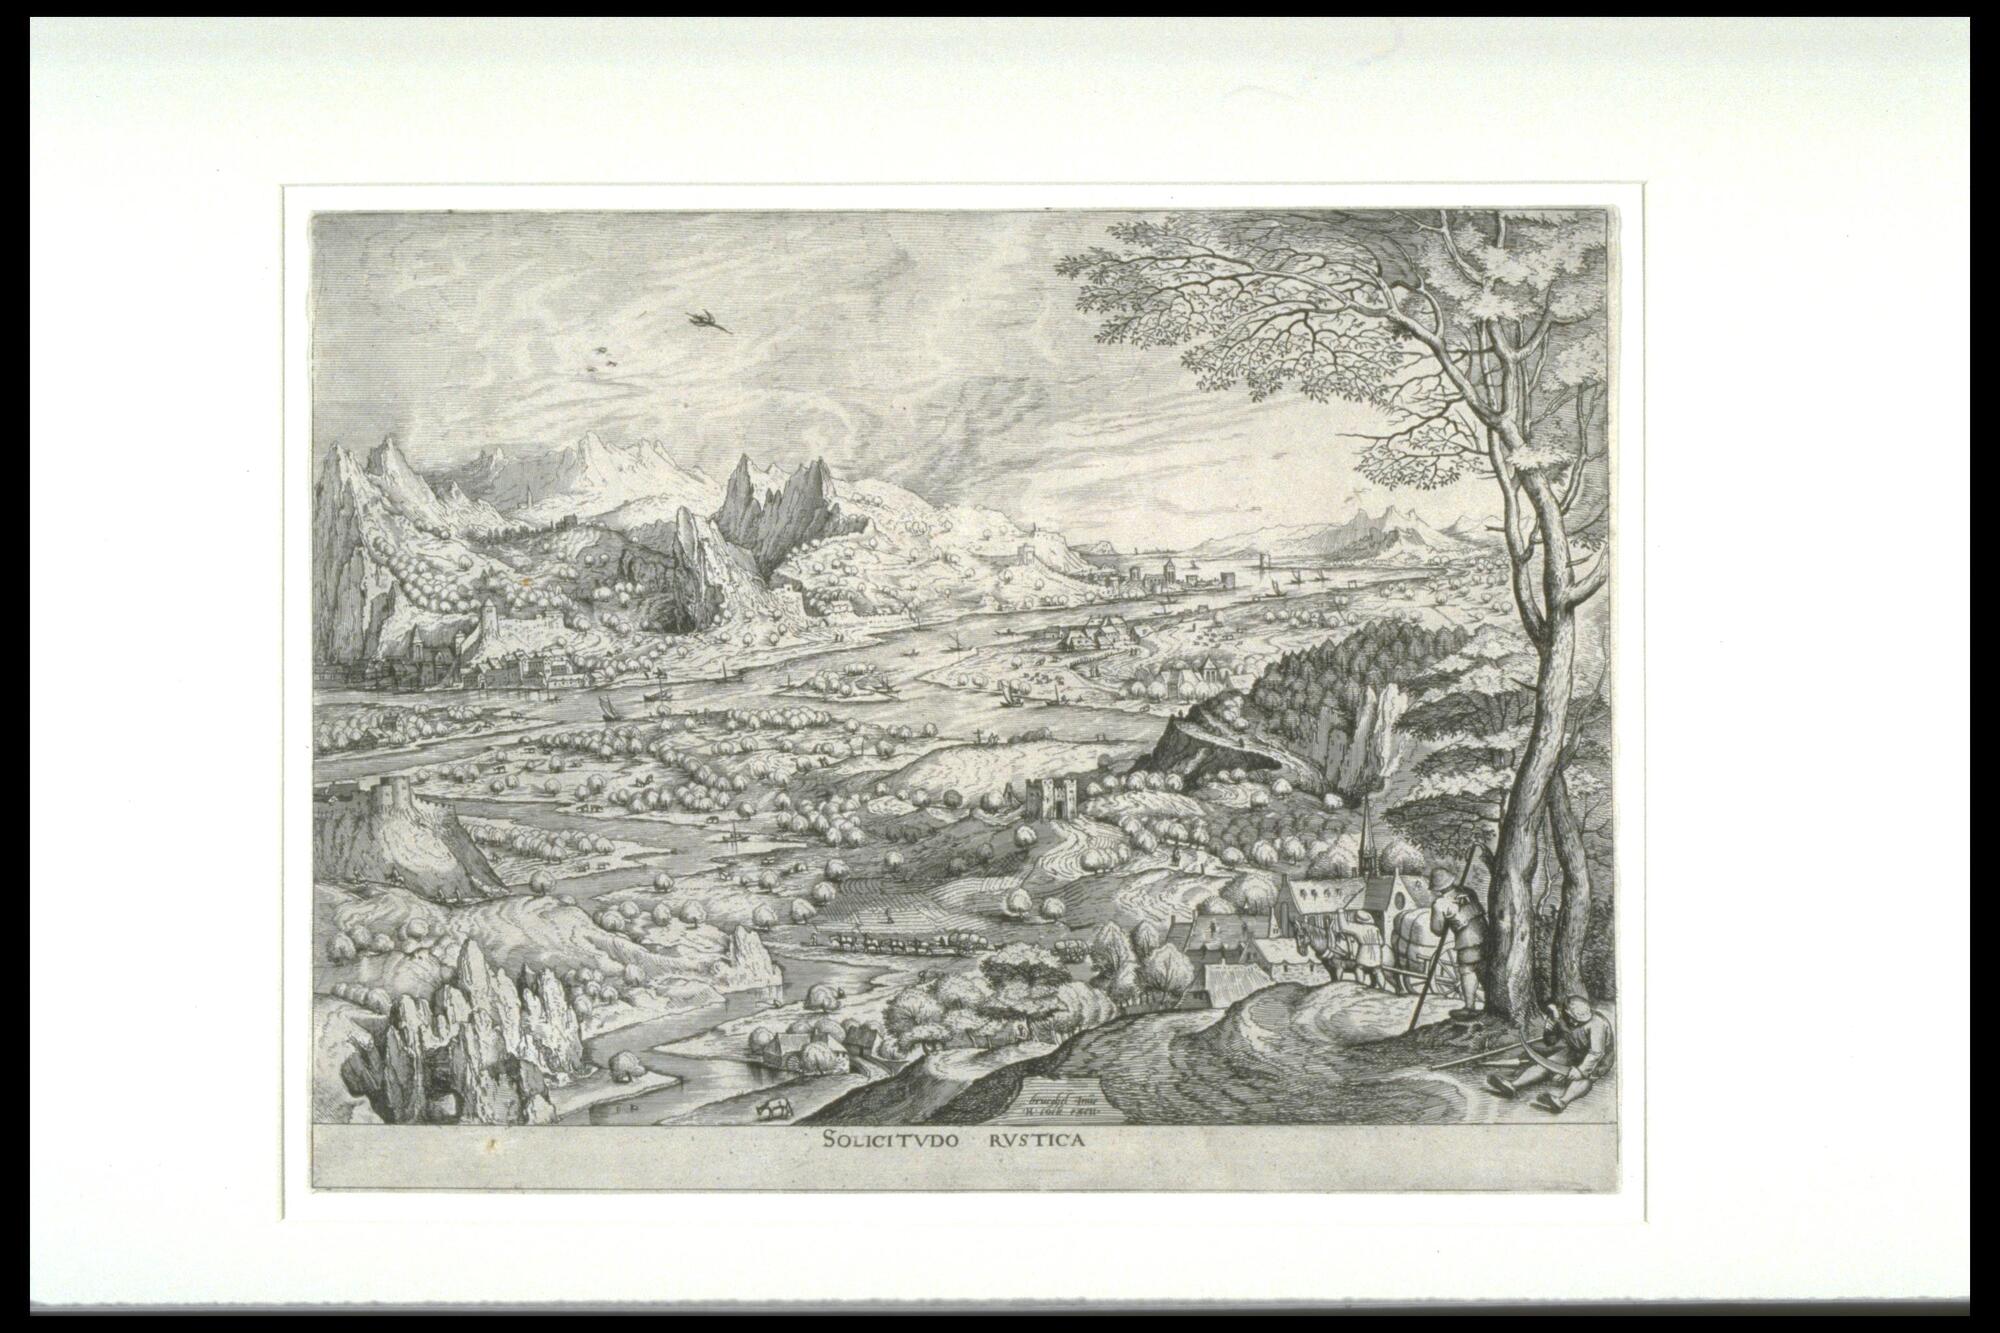 This print offers an expansive vista over a river valley bordered by high mountains in the distance. In the foreground a peasant sits on the ground hammering the blade of his scythe as another man leans against a tree and gazes into the valley. Boats, towns, and villages dot the landscape.